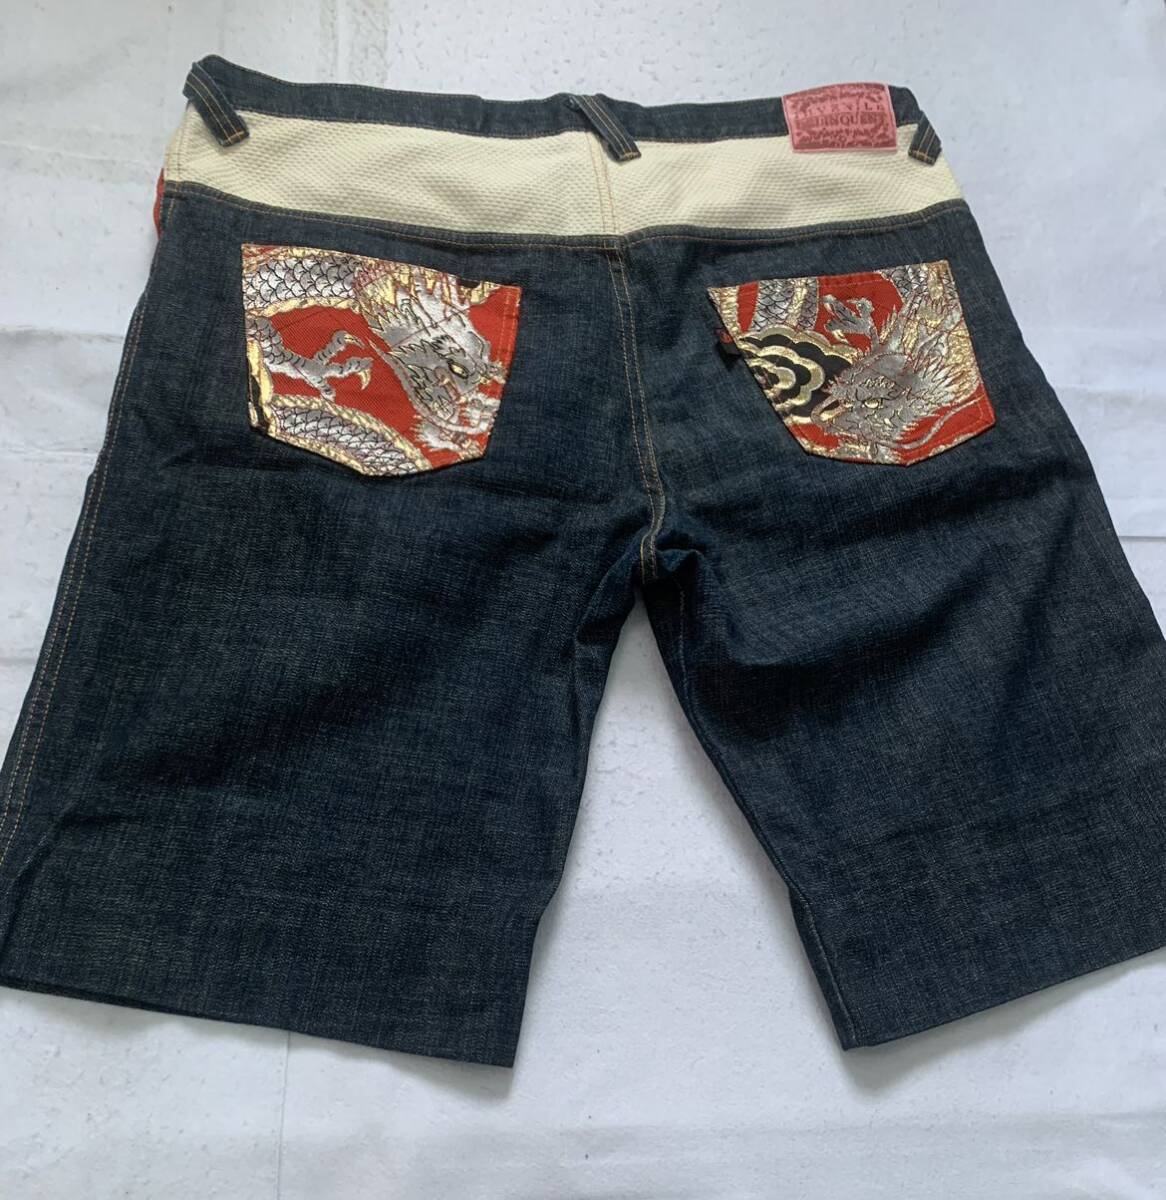 JUVENILE DELINQUENT half Denim jeans embroidery red Dragon peace pattern made in Japan W42